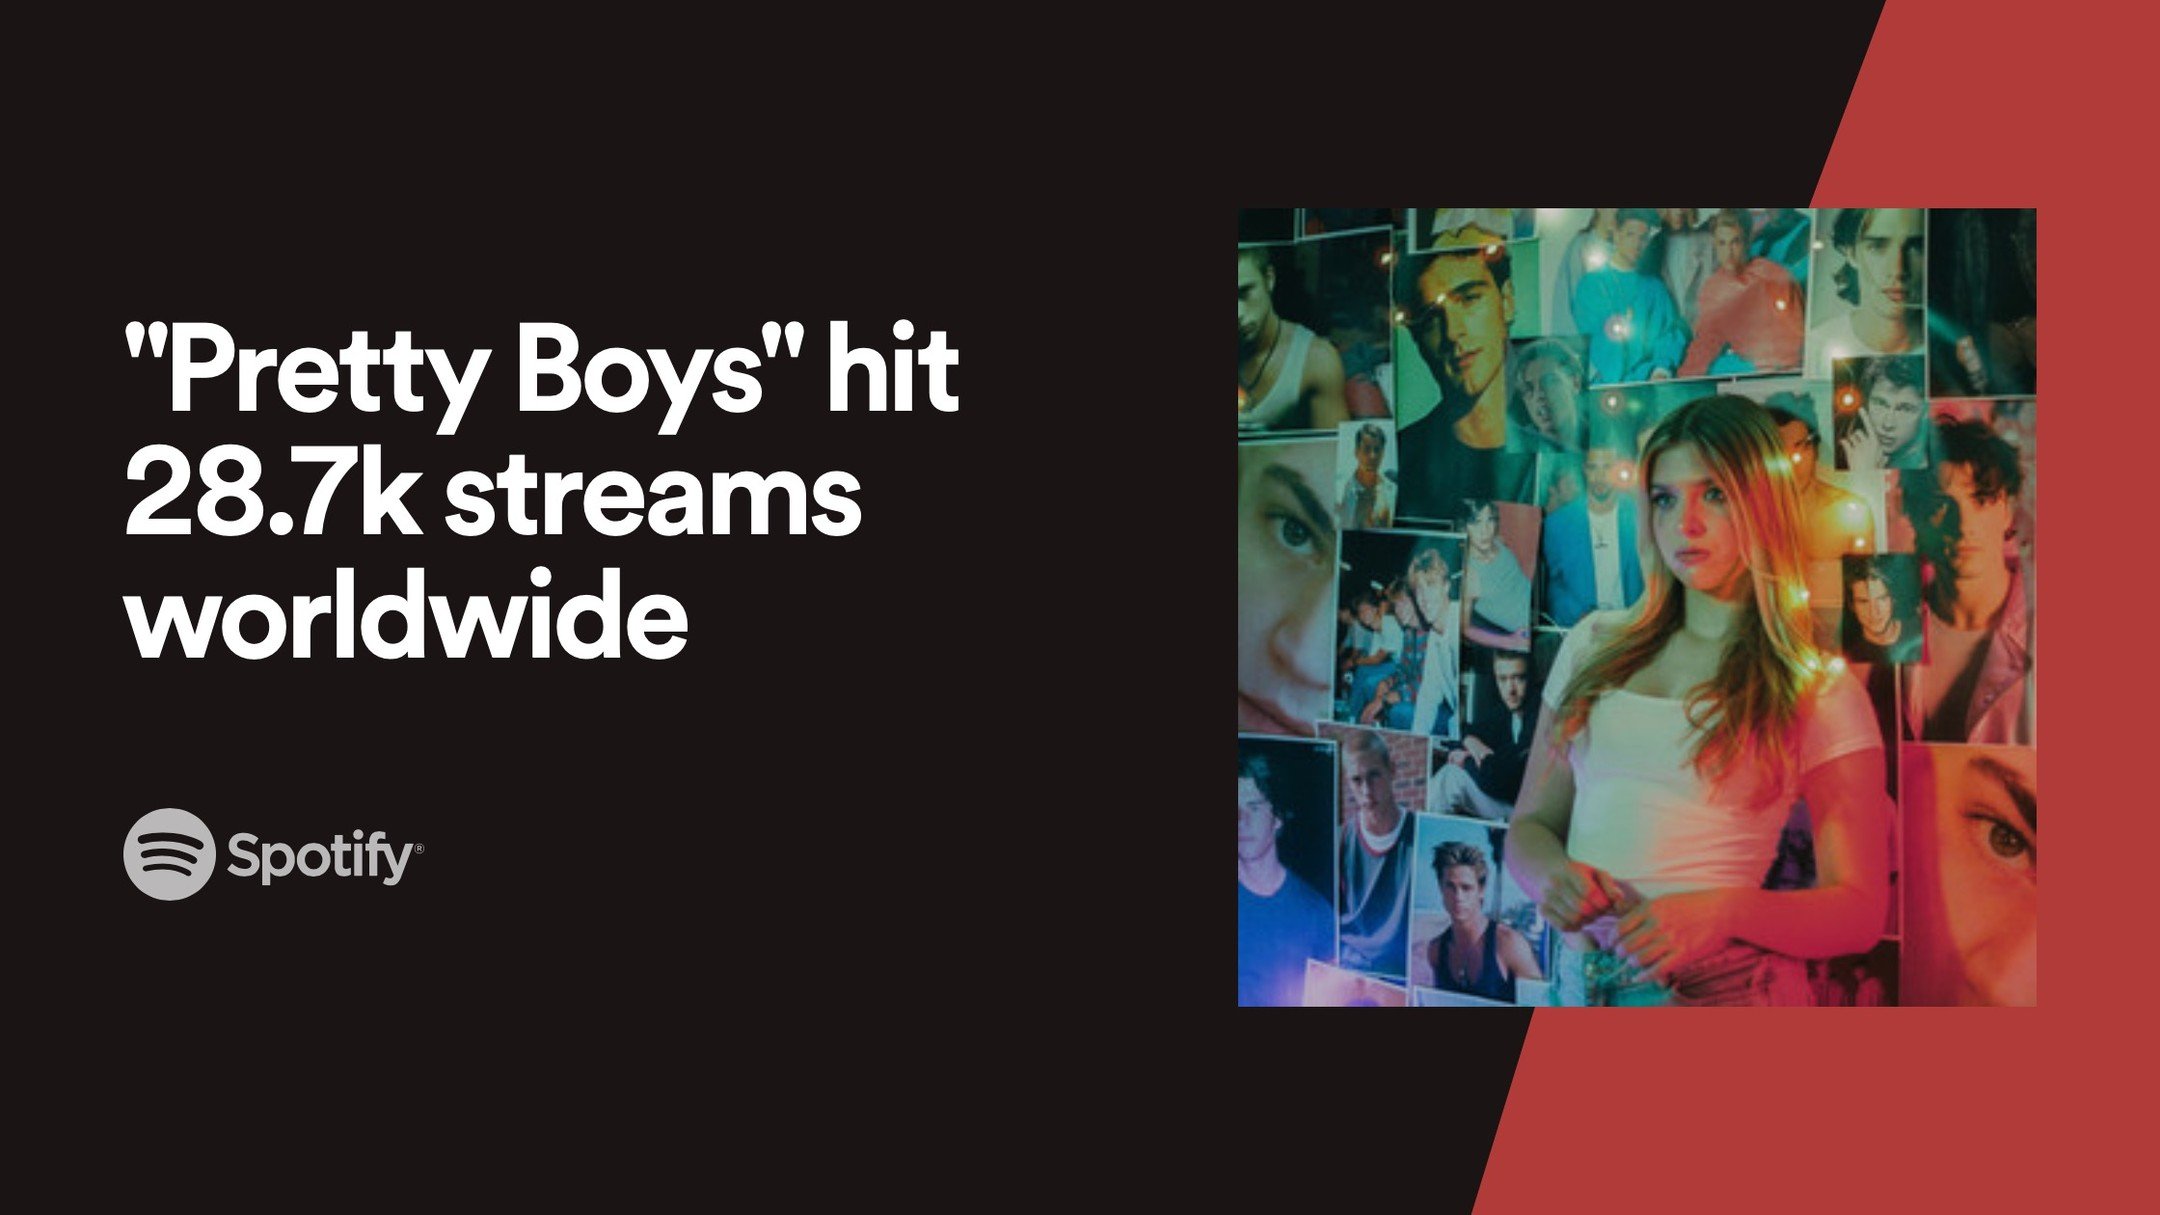 🚀 28.7K streams and counting! Thank you for the love on &quot;Pretty Boys&quot;! Let's keep this going! Stream it, share it, add it to your playlists! Let's turn this anthem into our movement. #prettyboys #spotify #selflove #newrelease #grateful #th